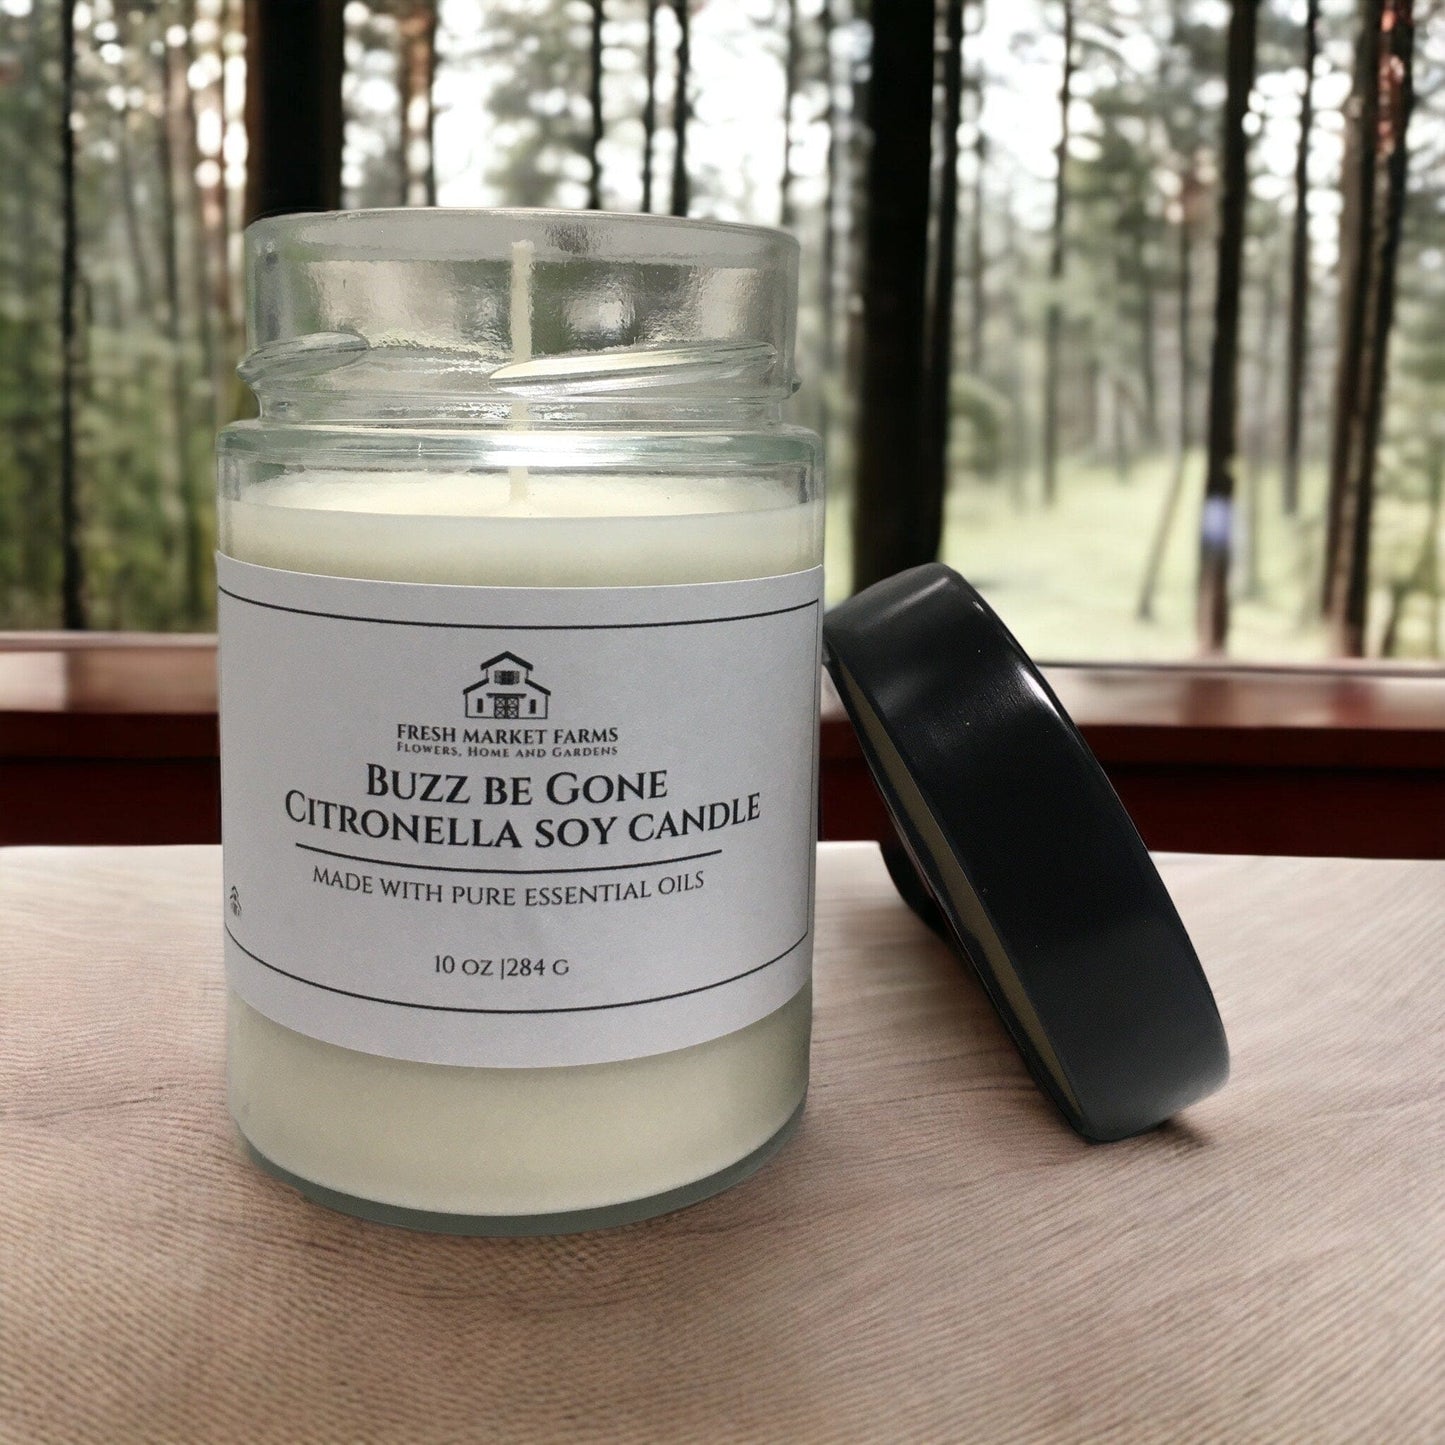 ZERO WASTE BUZZ BE GONE OUTDOOR ORGANIC CITRONELLA & LEMONGRASS HAND POURED SOY CANDLE - 10oz